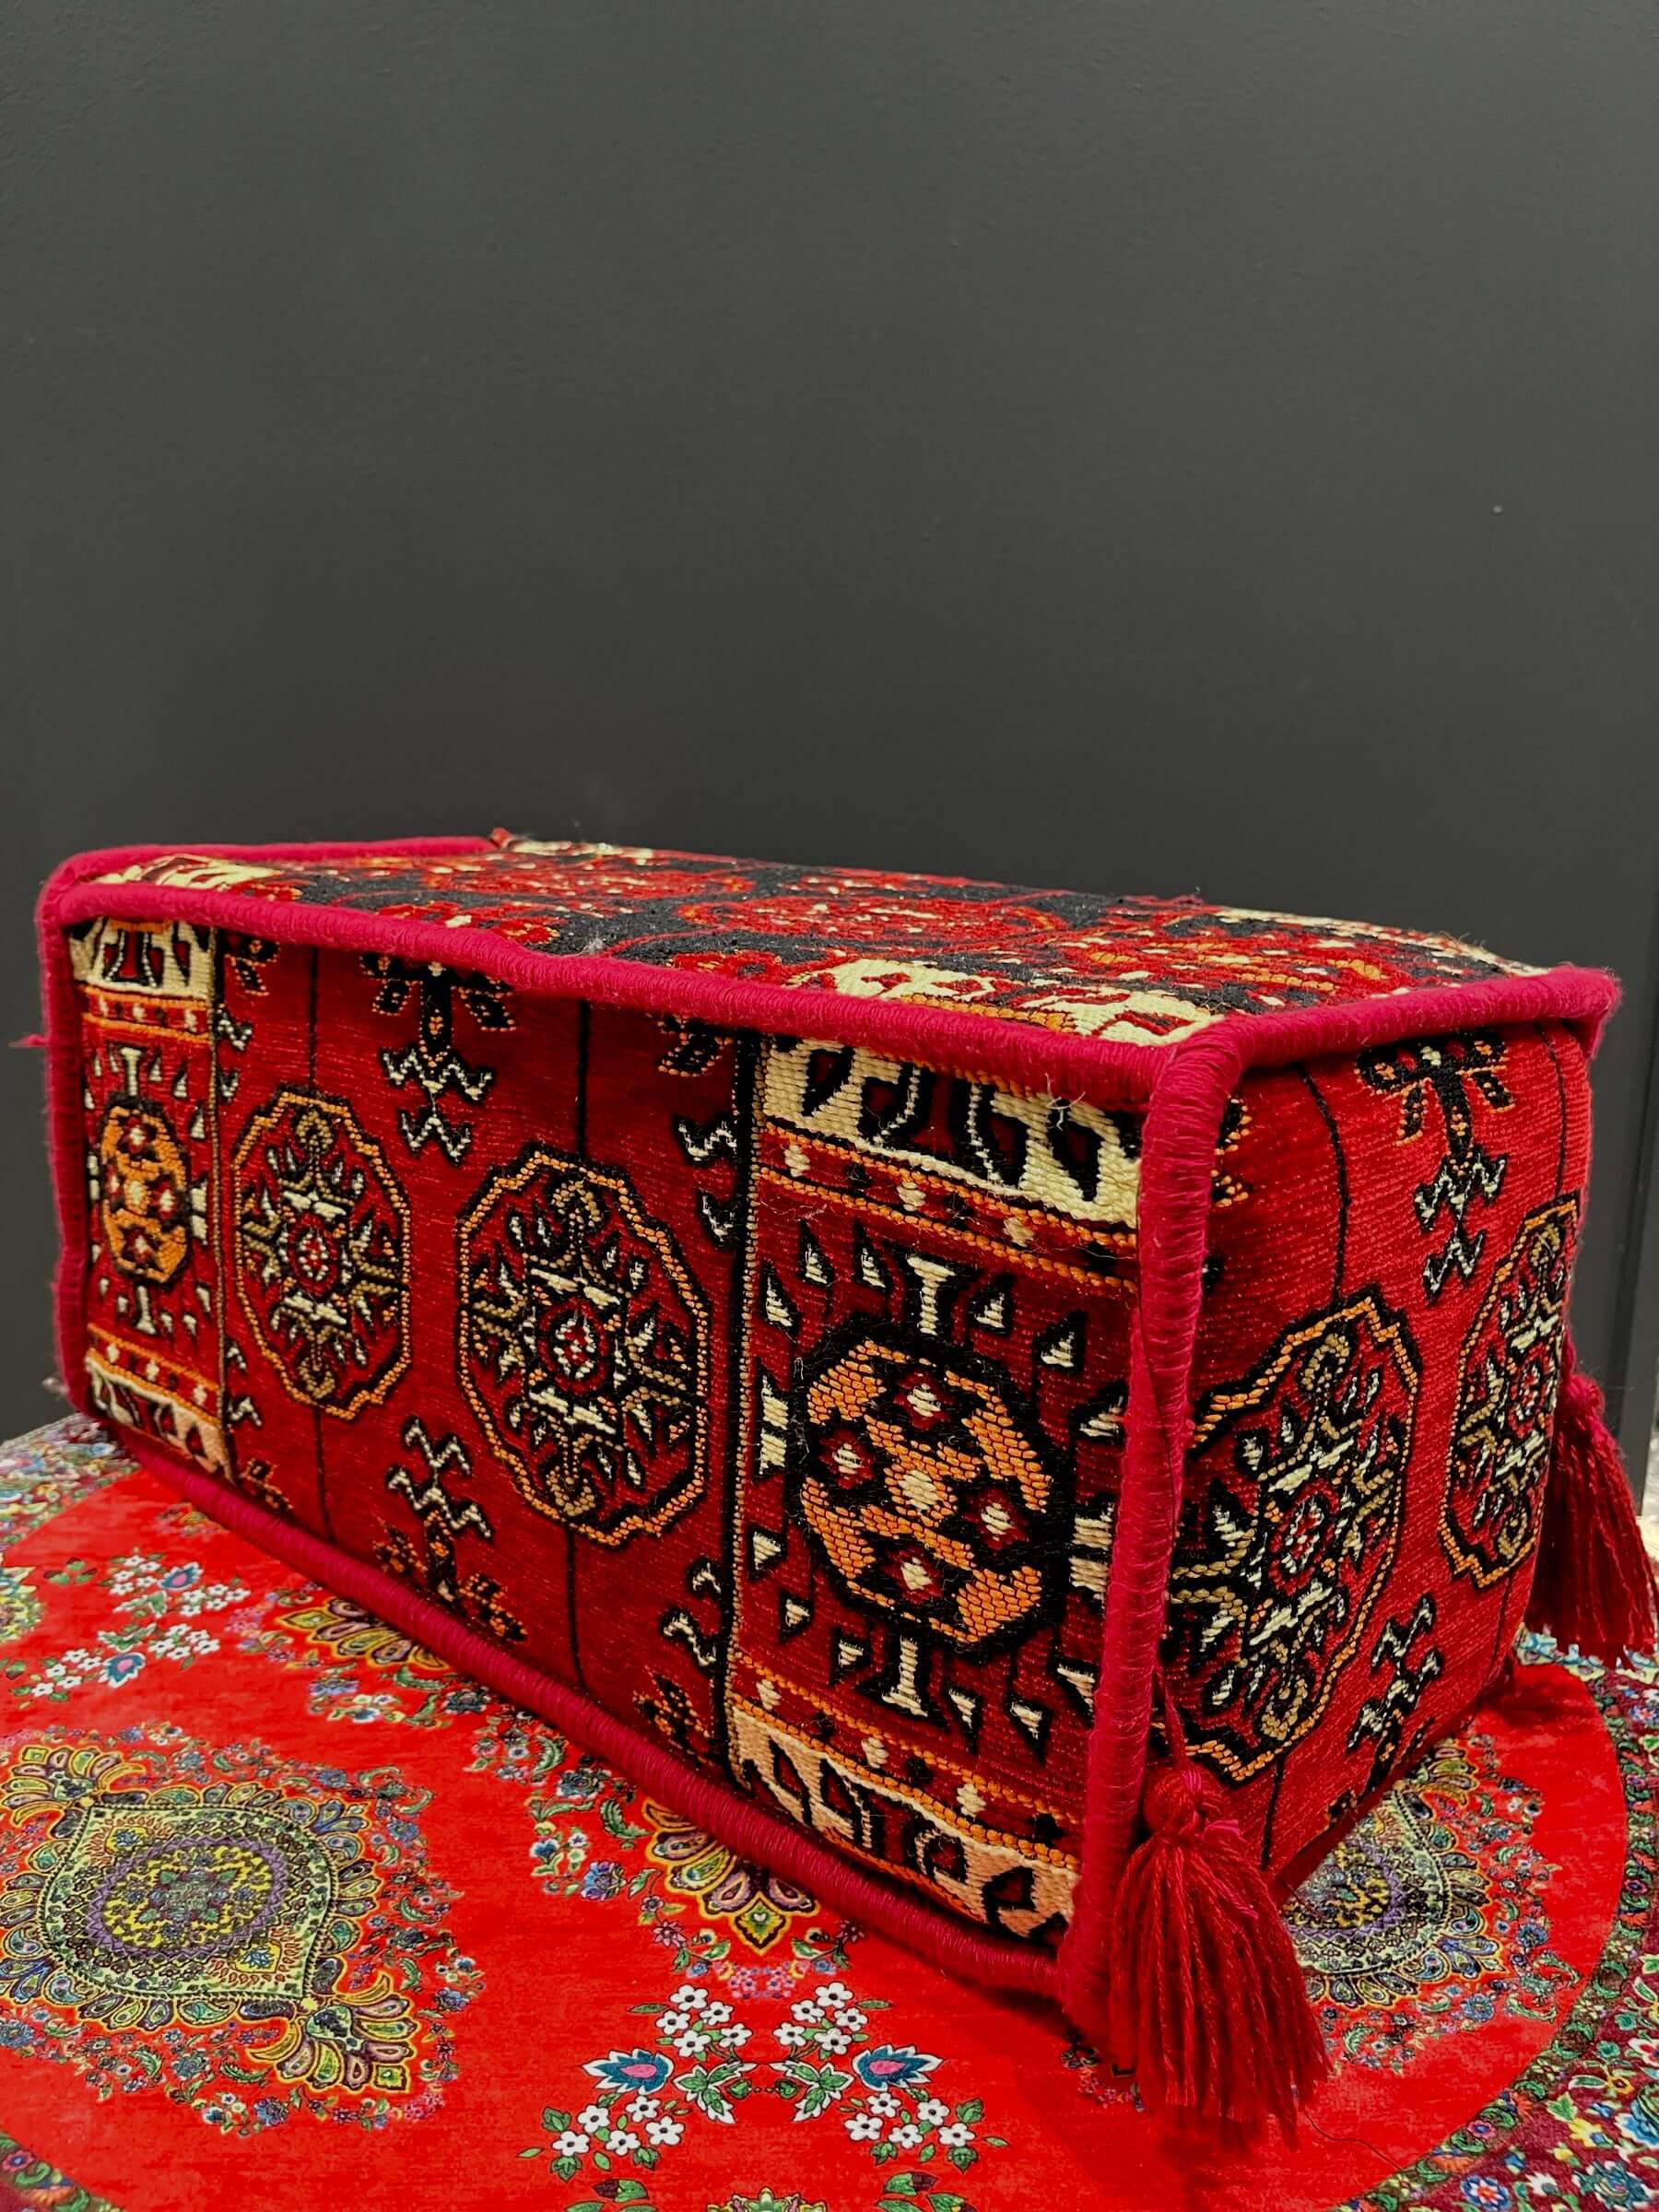 Experience the comfort of traditional Turkish armrests, designed with high-quality covers, supported by a sturdy sponge, and display artisanal craftsmanship. Enjoy a colorful and vibrant design that adds a unique touch to any room. Perfect for long-term s